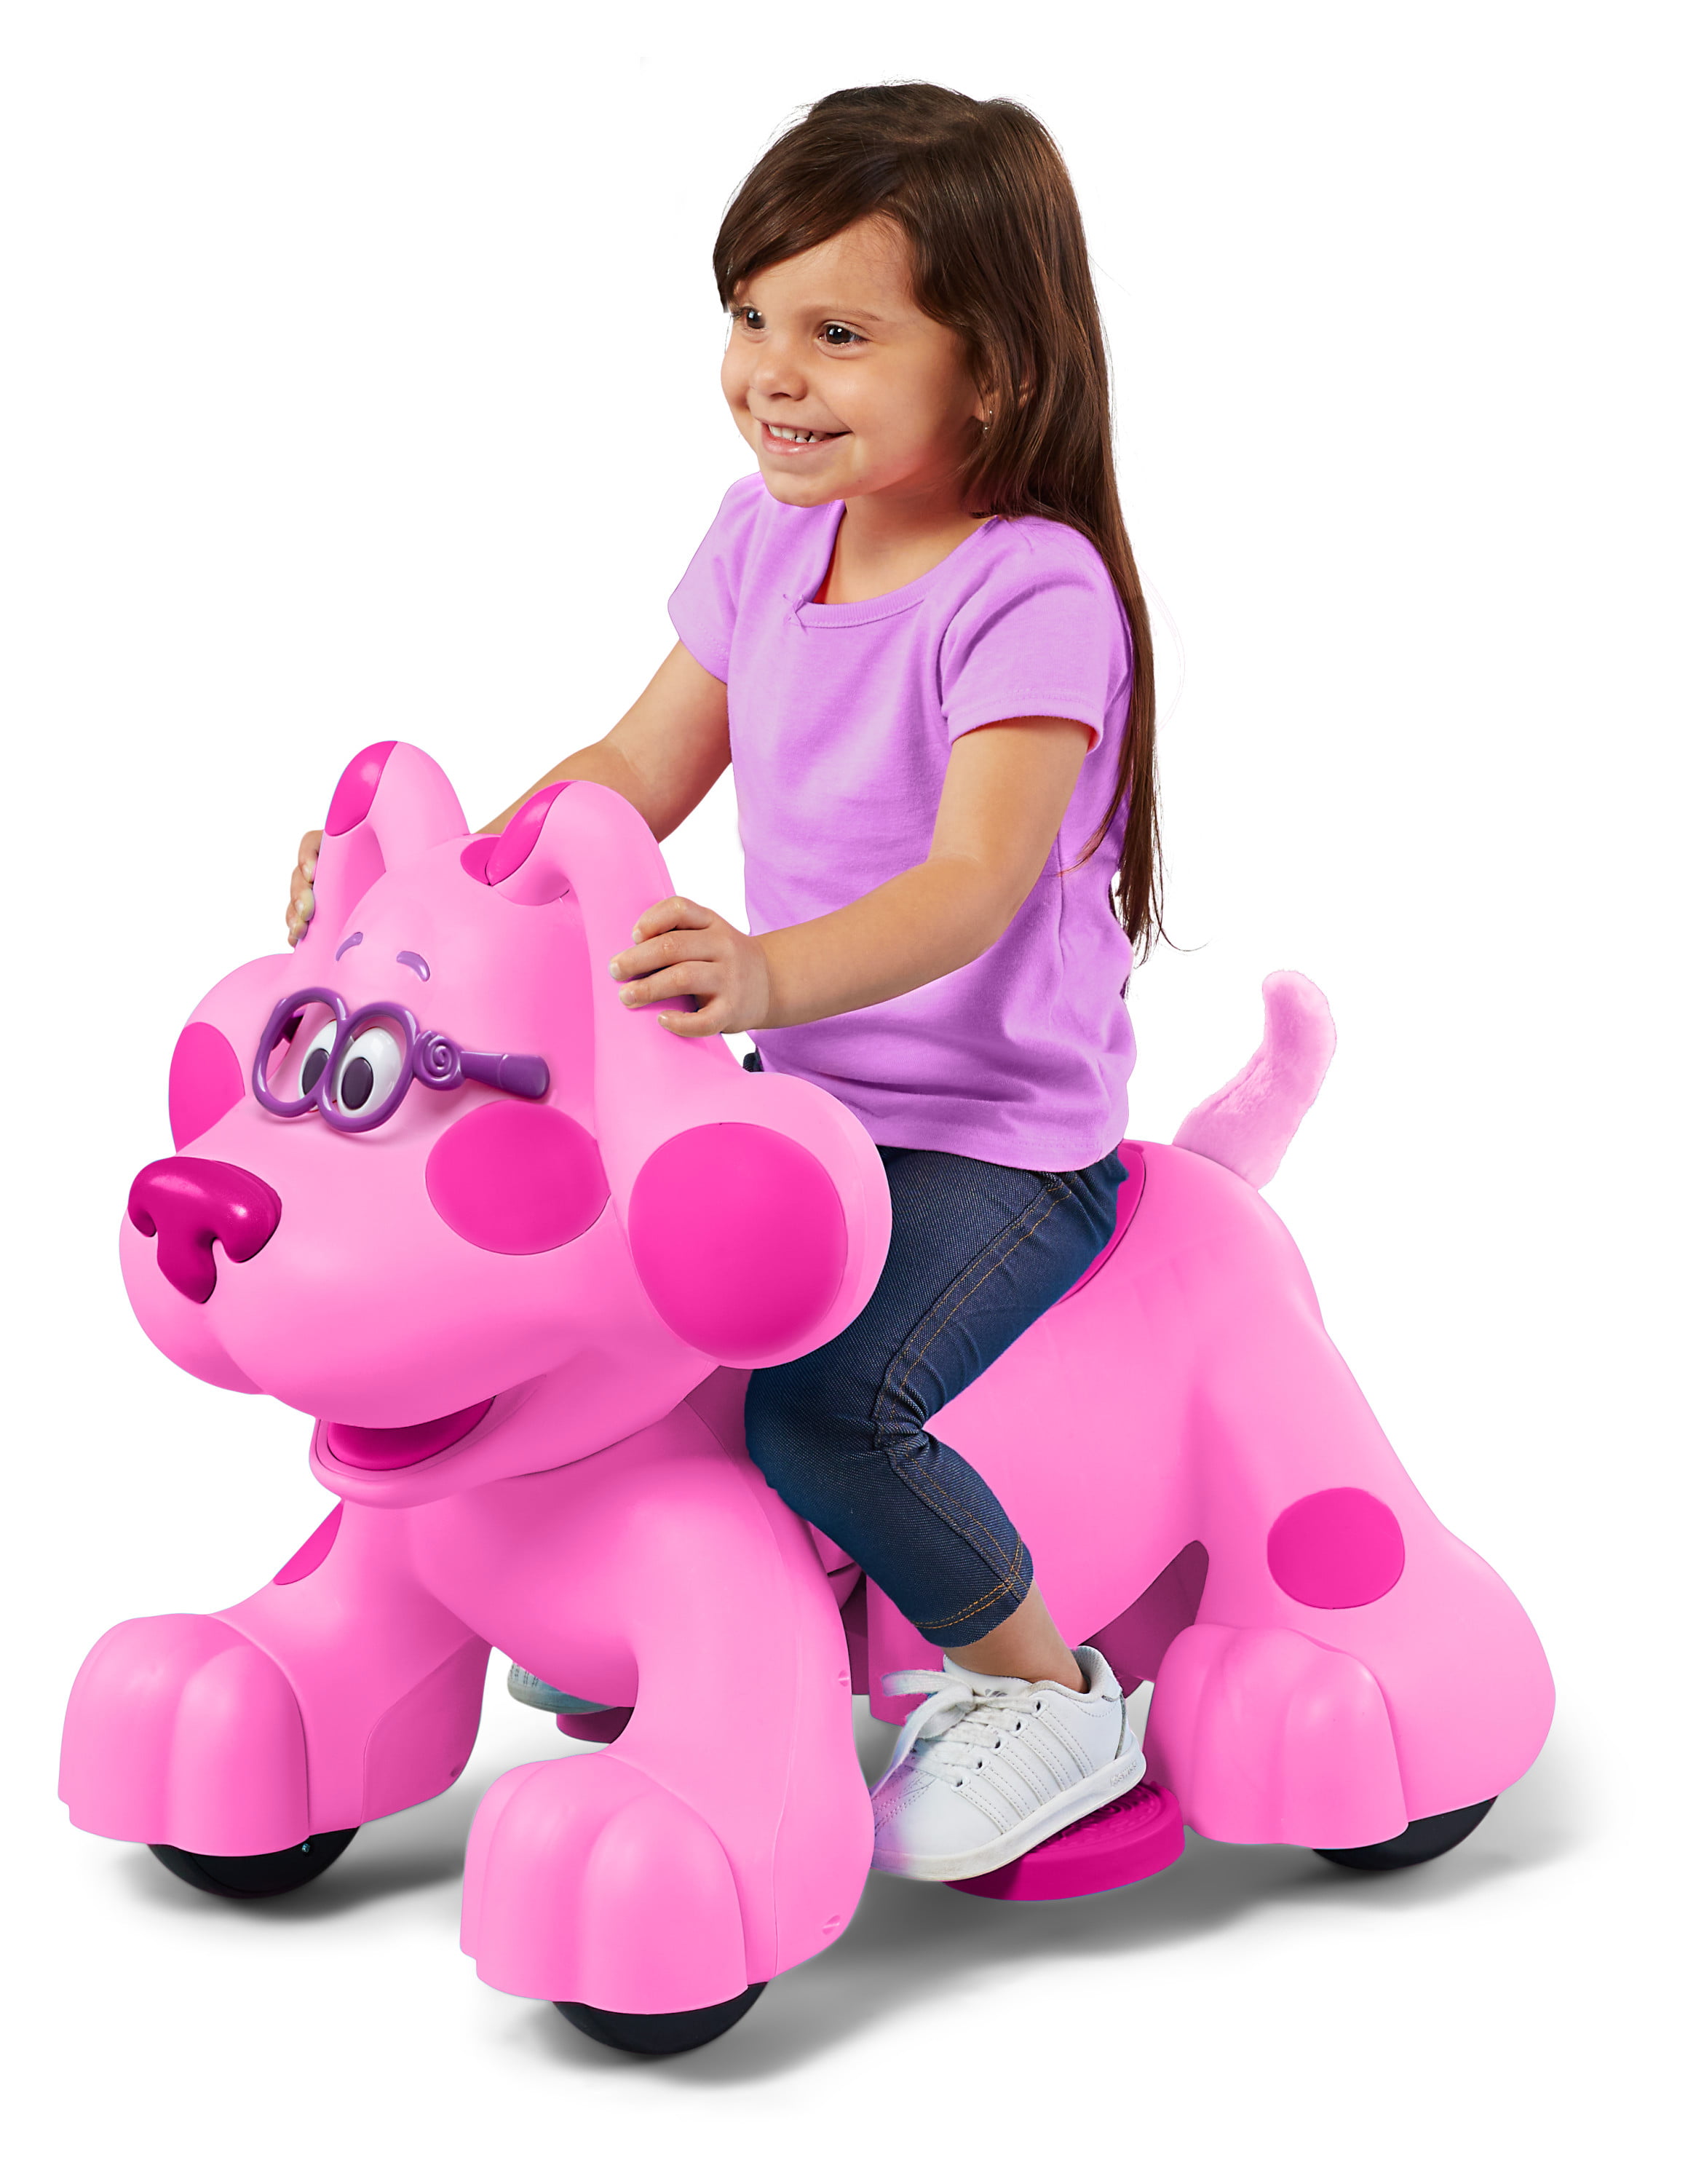 Details about   Kids Inchworm Ride On Toy Bouncer Worm Saddle Seat Indoor Outdoor Handle Safe 